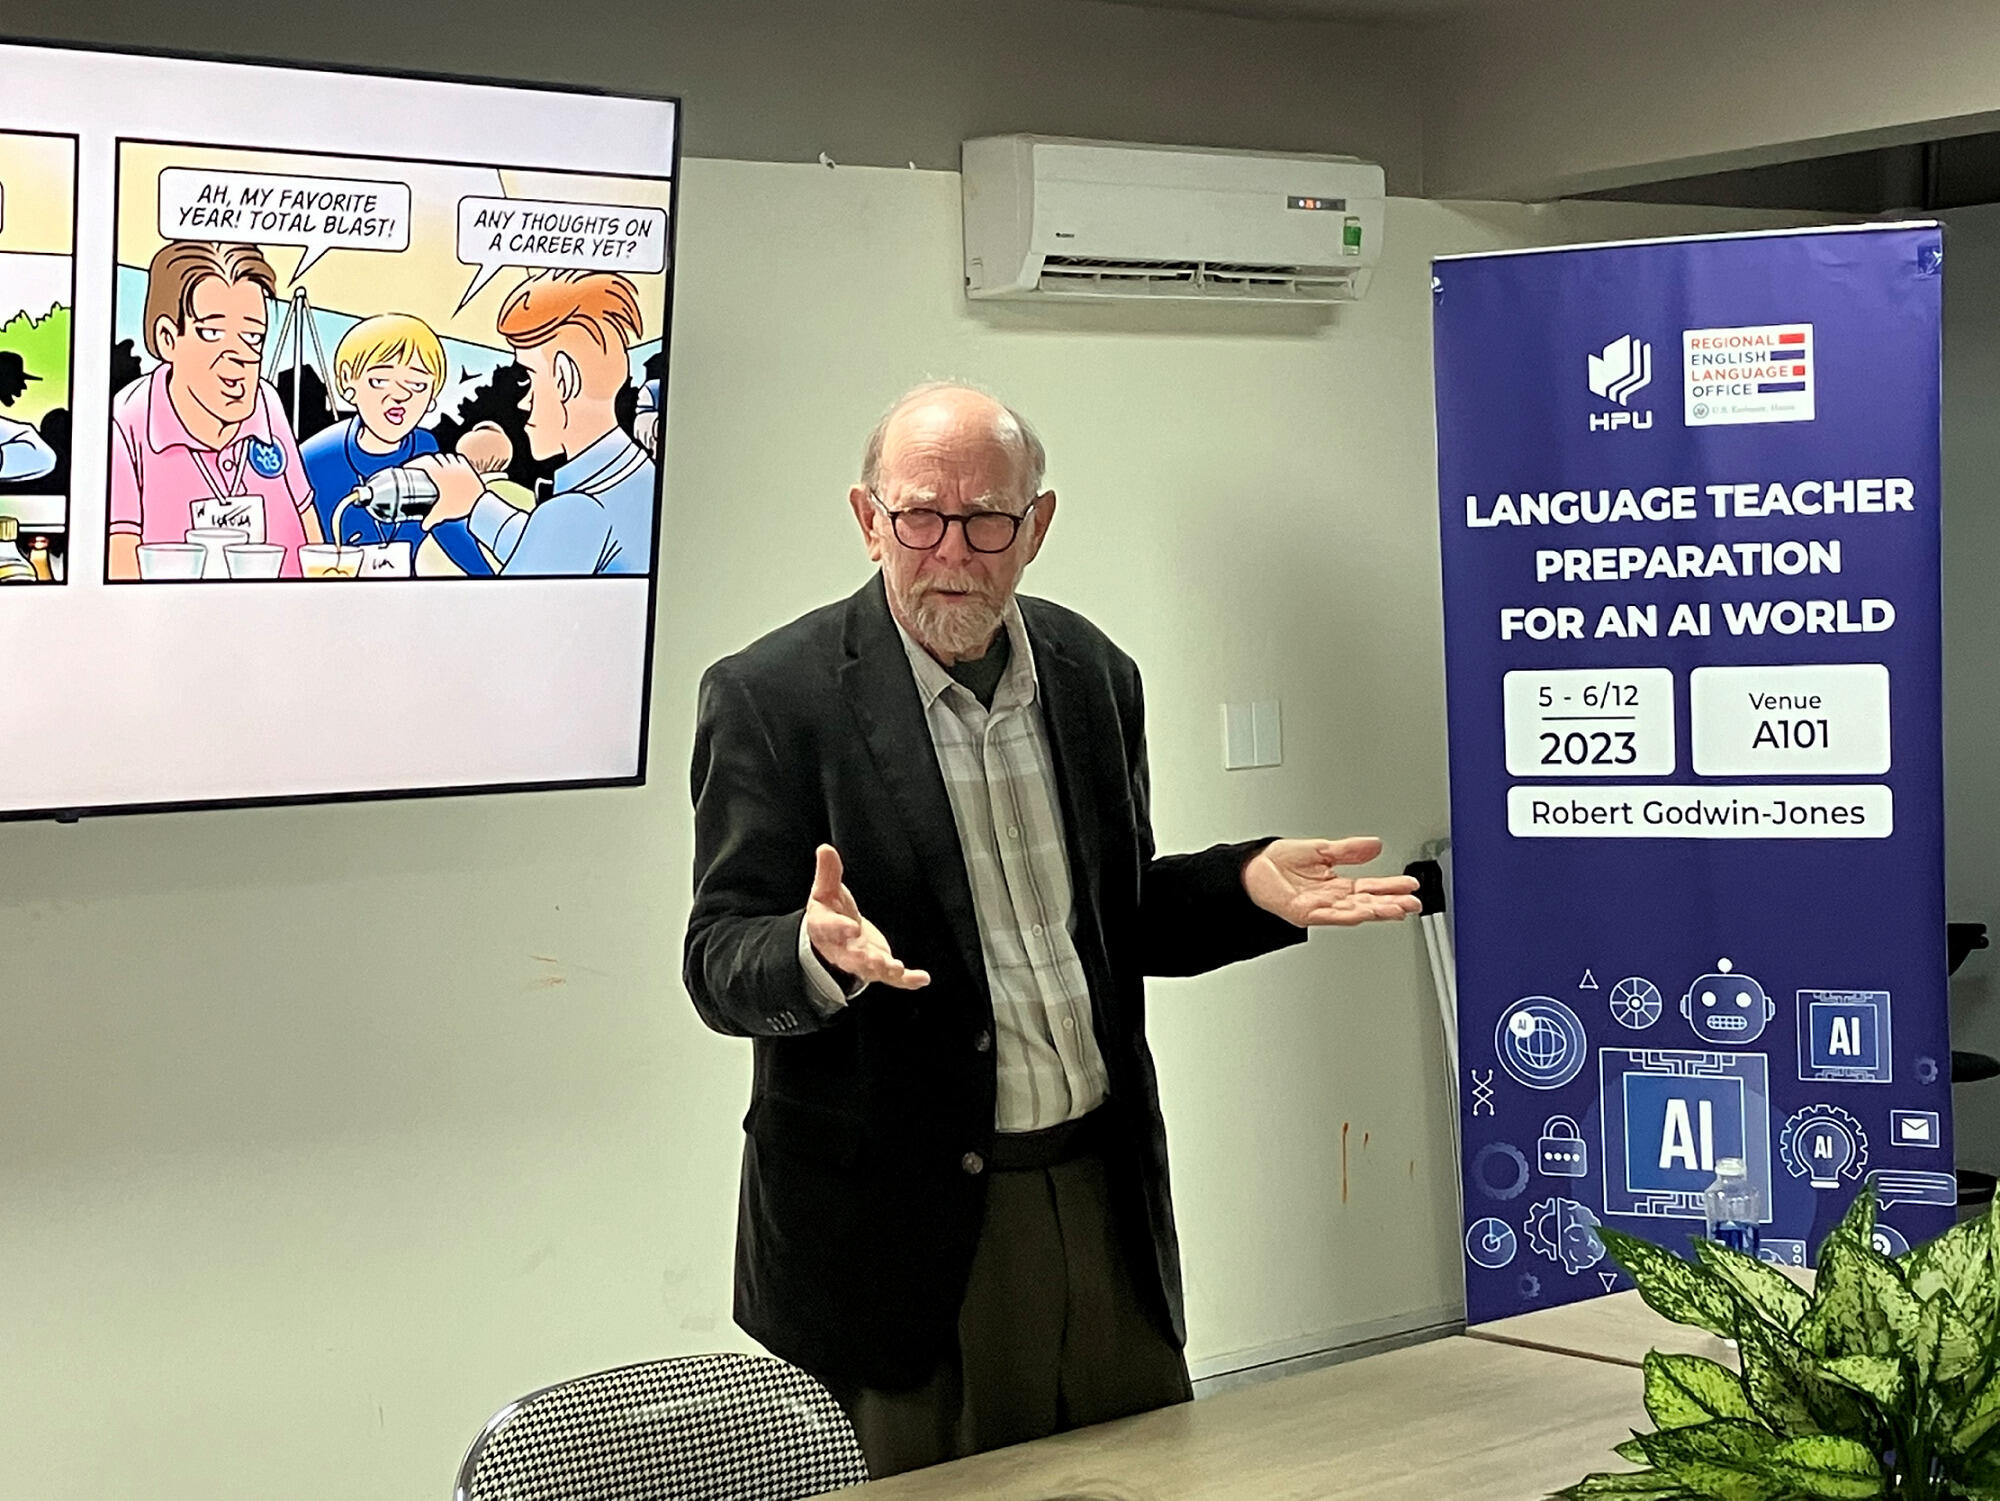 A photo of a man standing behind a table talking. Next to him is a banner that says \"LANGUAGE TEACHER PREPARATION FOR AN AI WORLD\" 